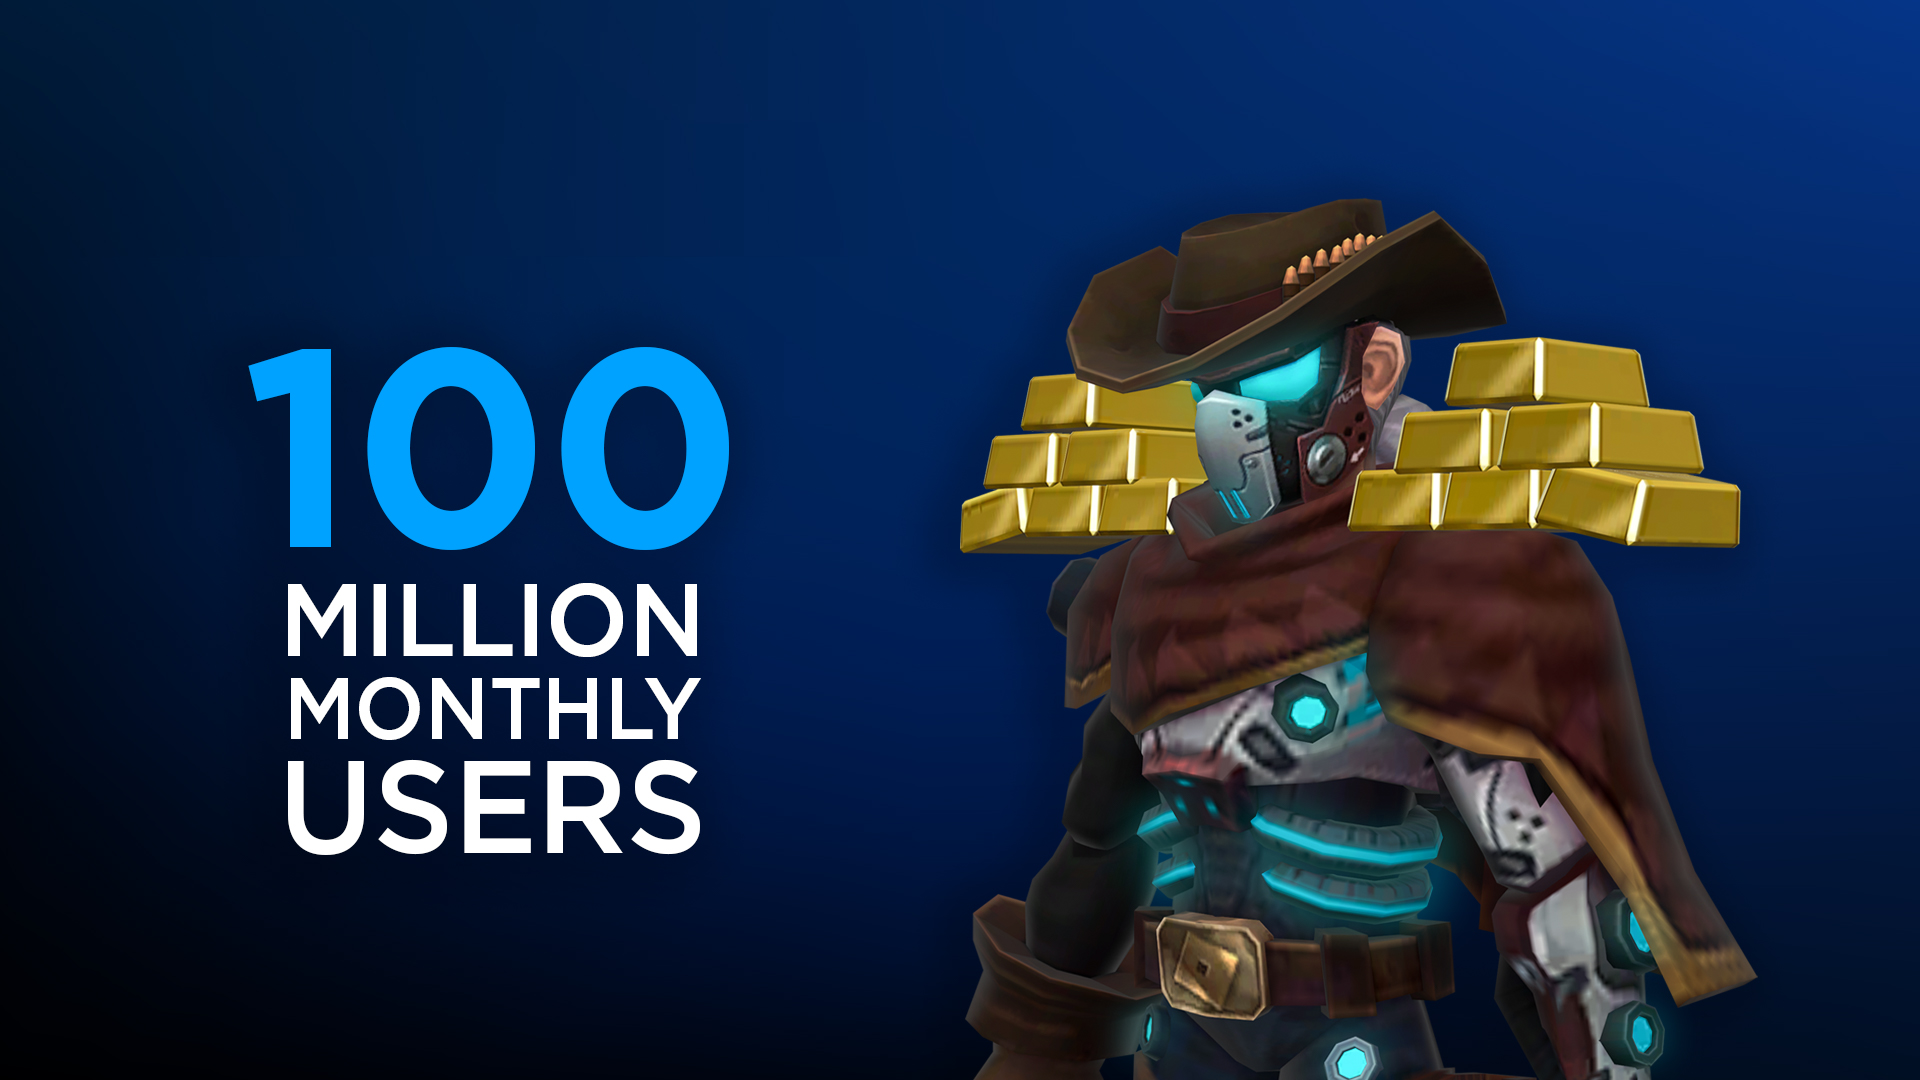 Roblox Hits 100 Million Monthly Users Worldwide Roblox Blog